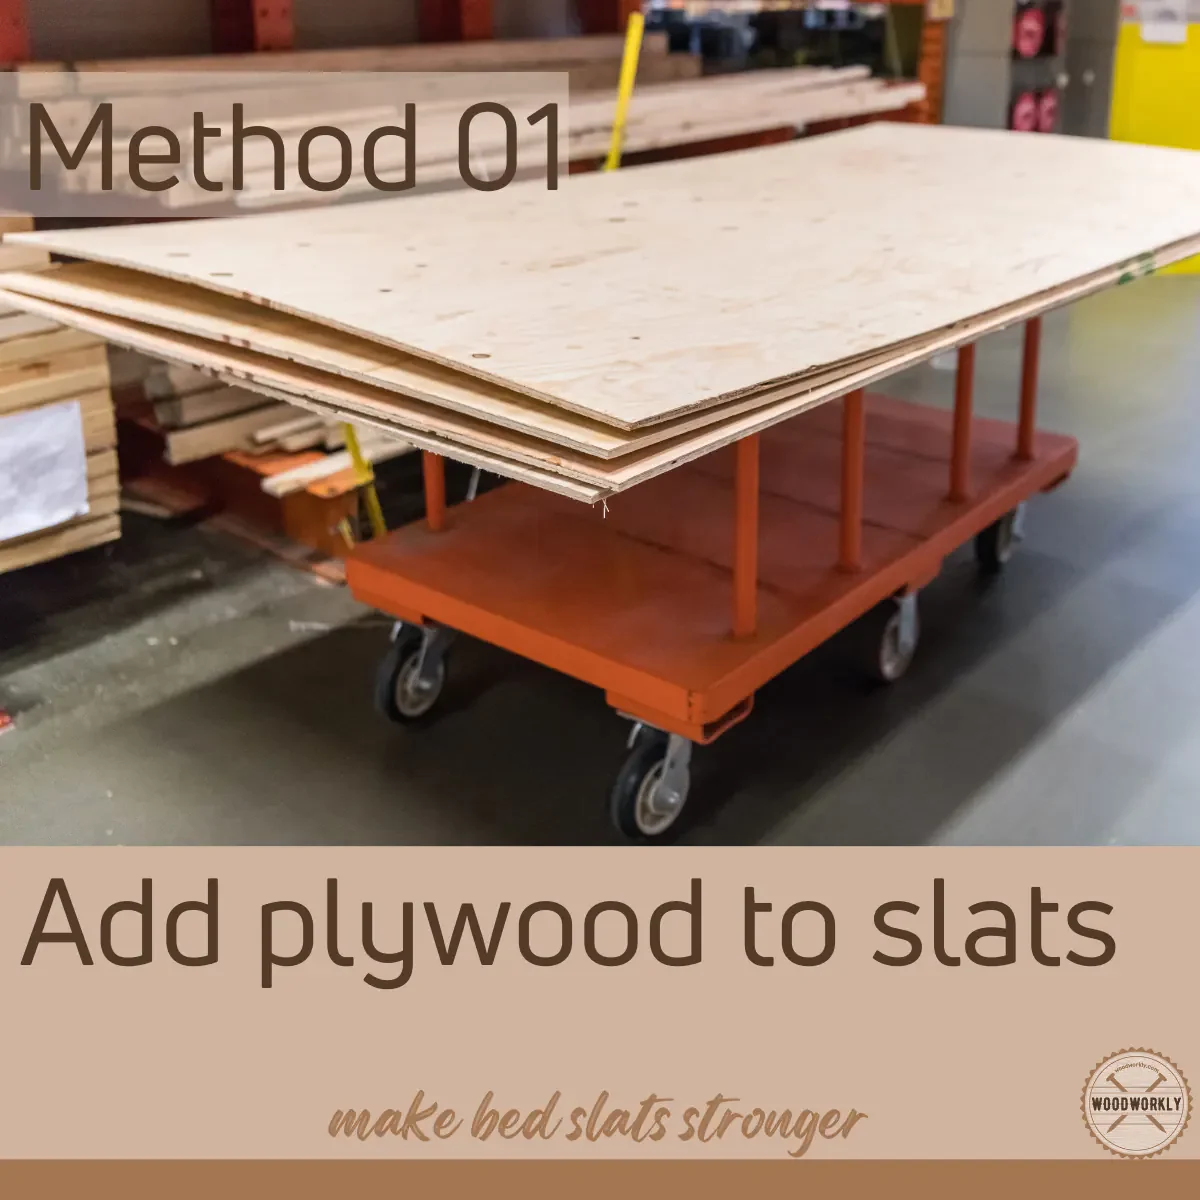 top bed slats with a plywood to make bed slats stronger